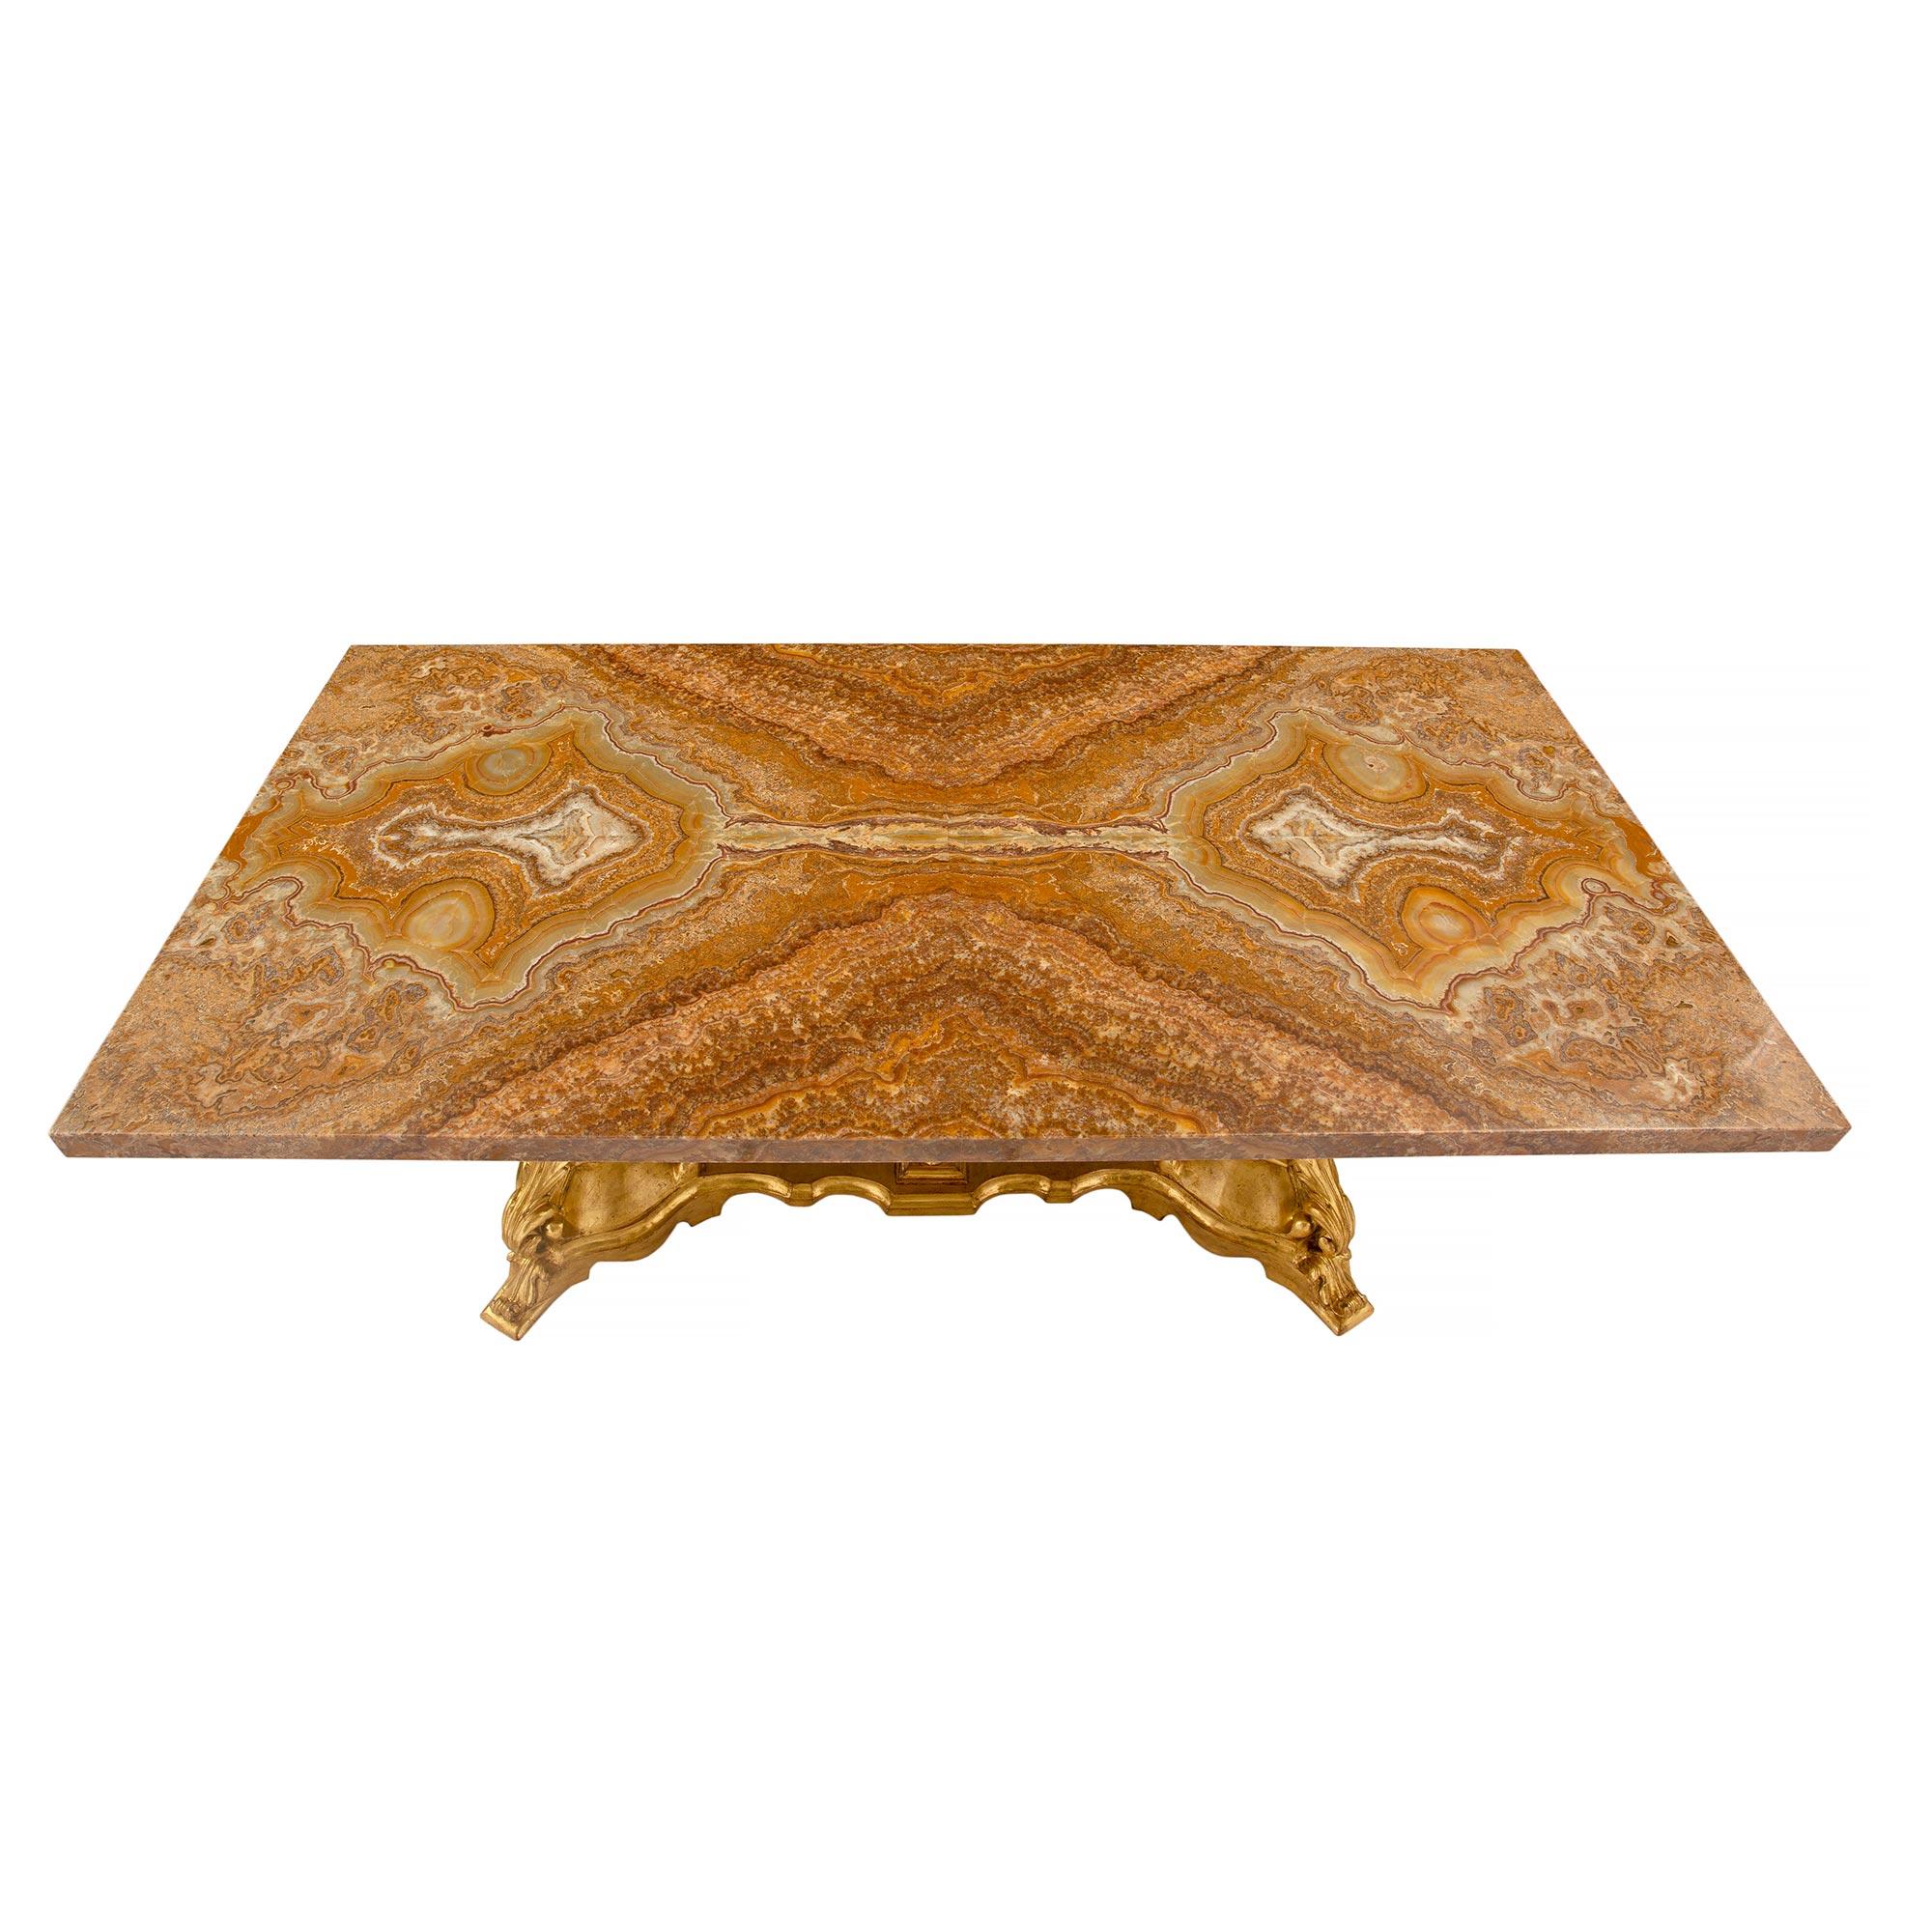 A handsome Italian 19th century Baroque giltwood and Alabastro Pomato rectangular center table. The table is raised by striking fanciful giltwood supports with fine scrolled foliate feet and wonderful decorative movements. At the center of each